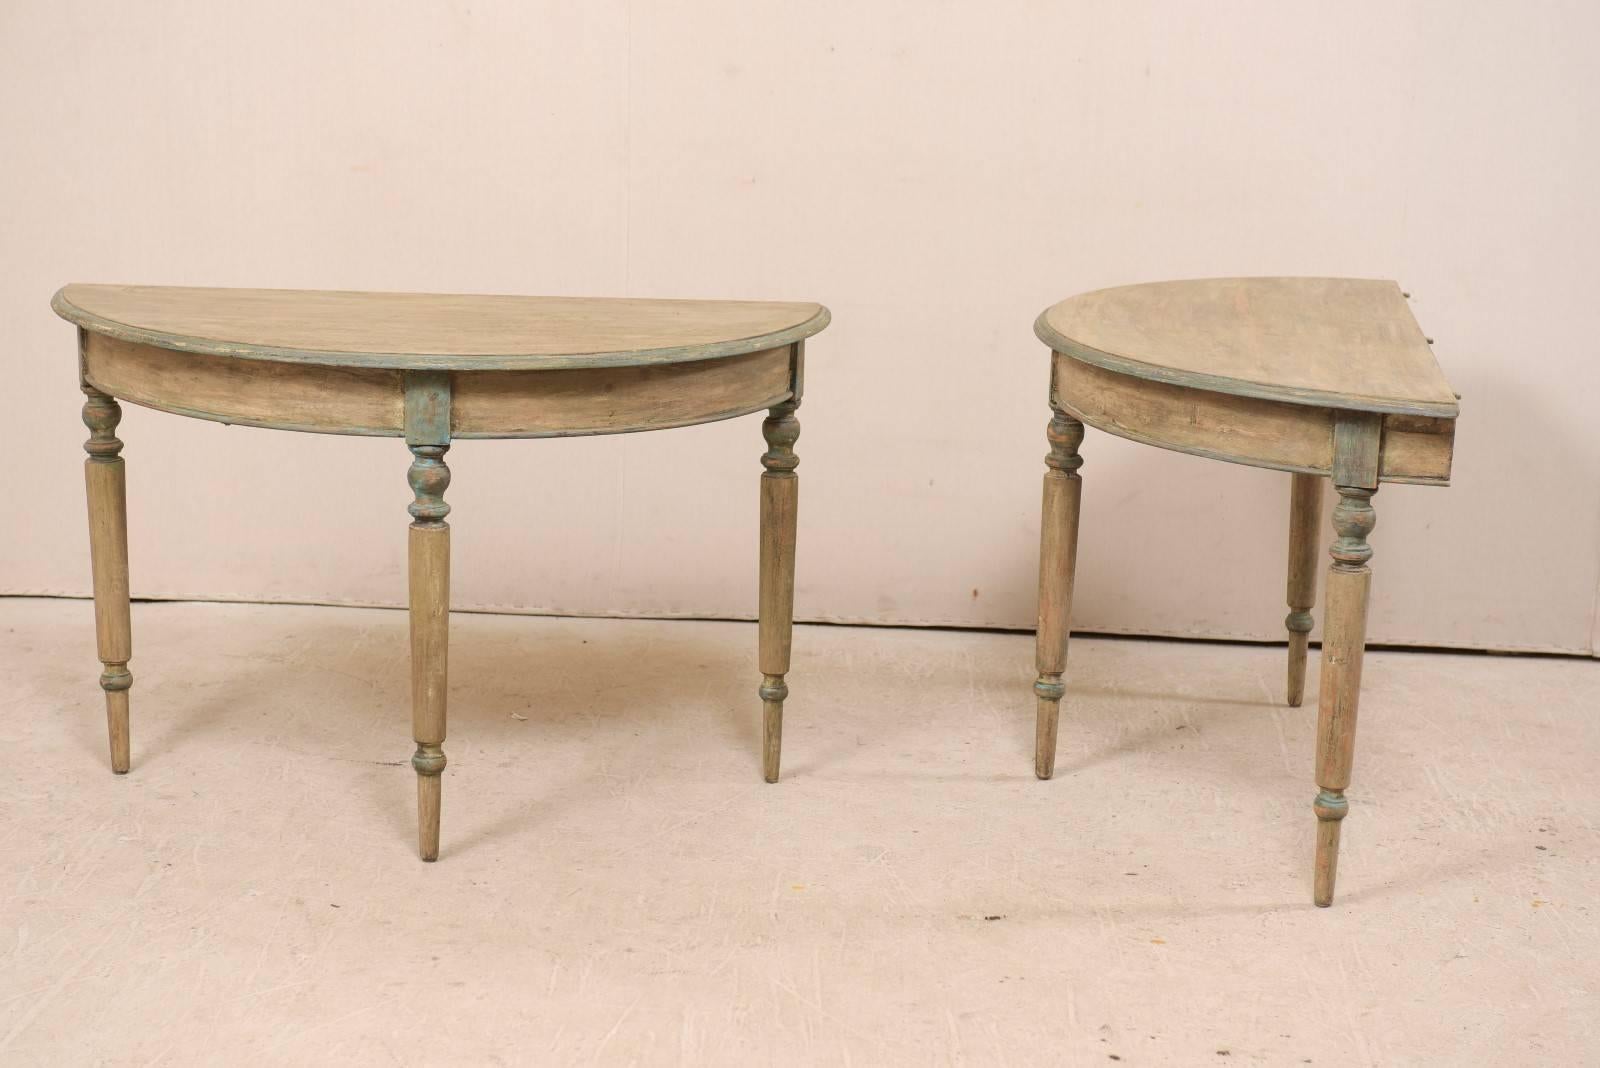 Pair of 19th Century Swedish Painted Wood Demi-Lune Tables with Turned Legs 4